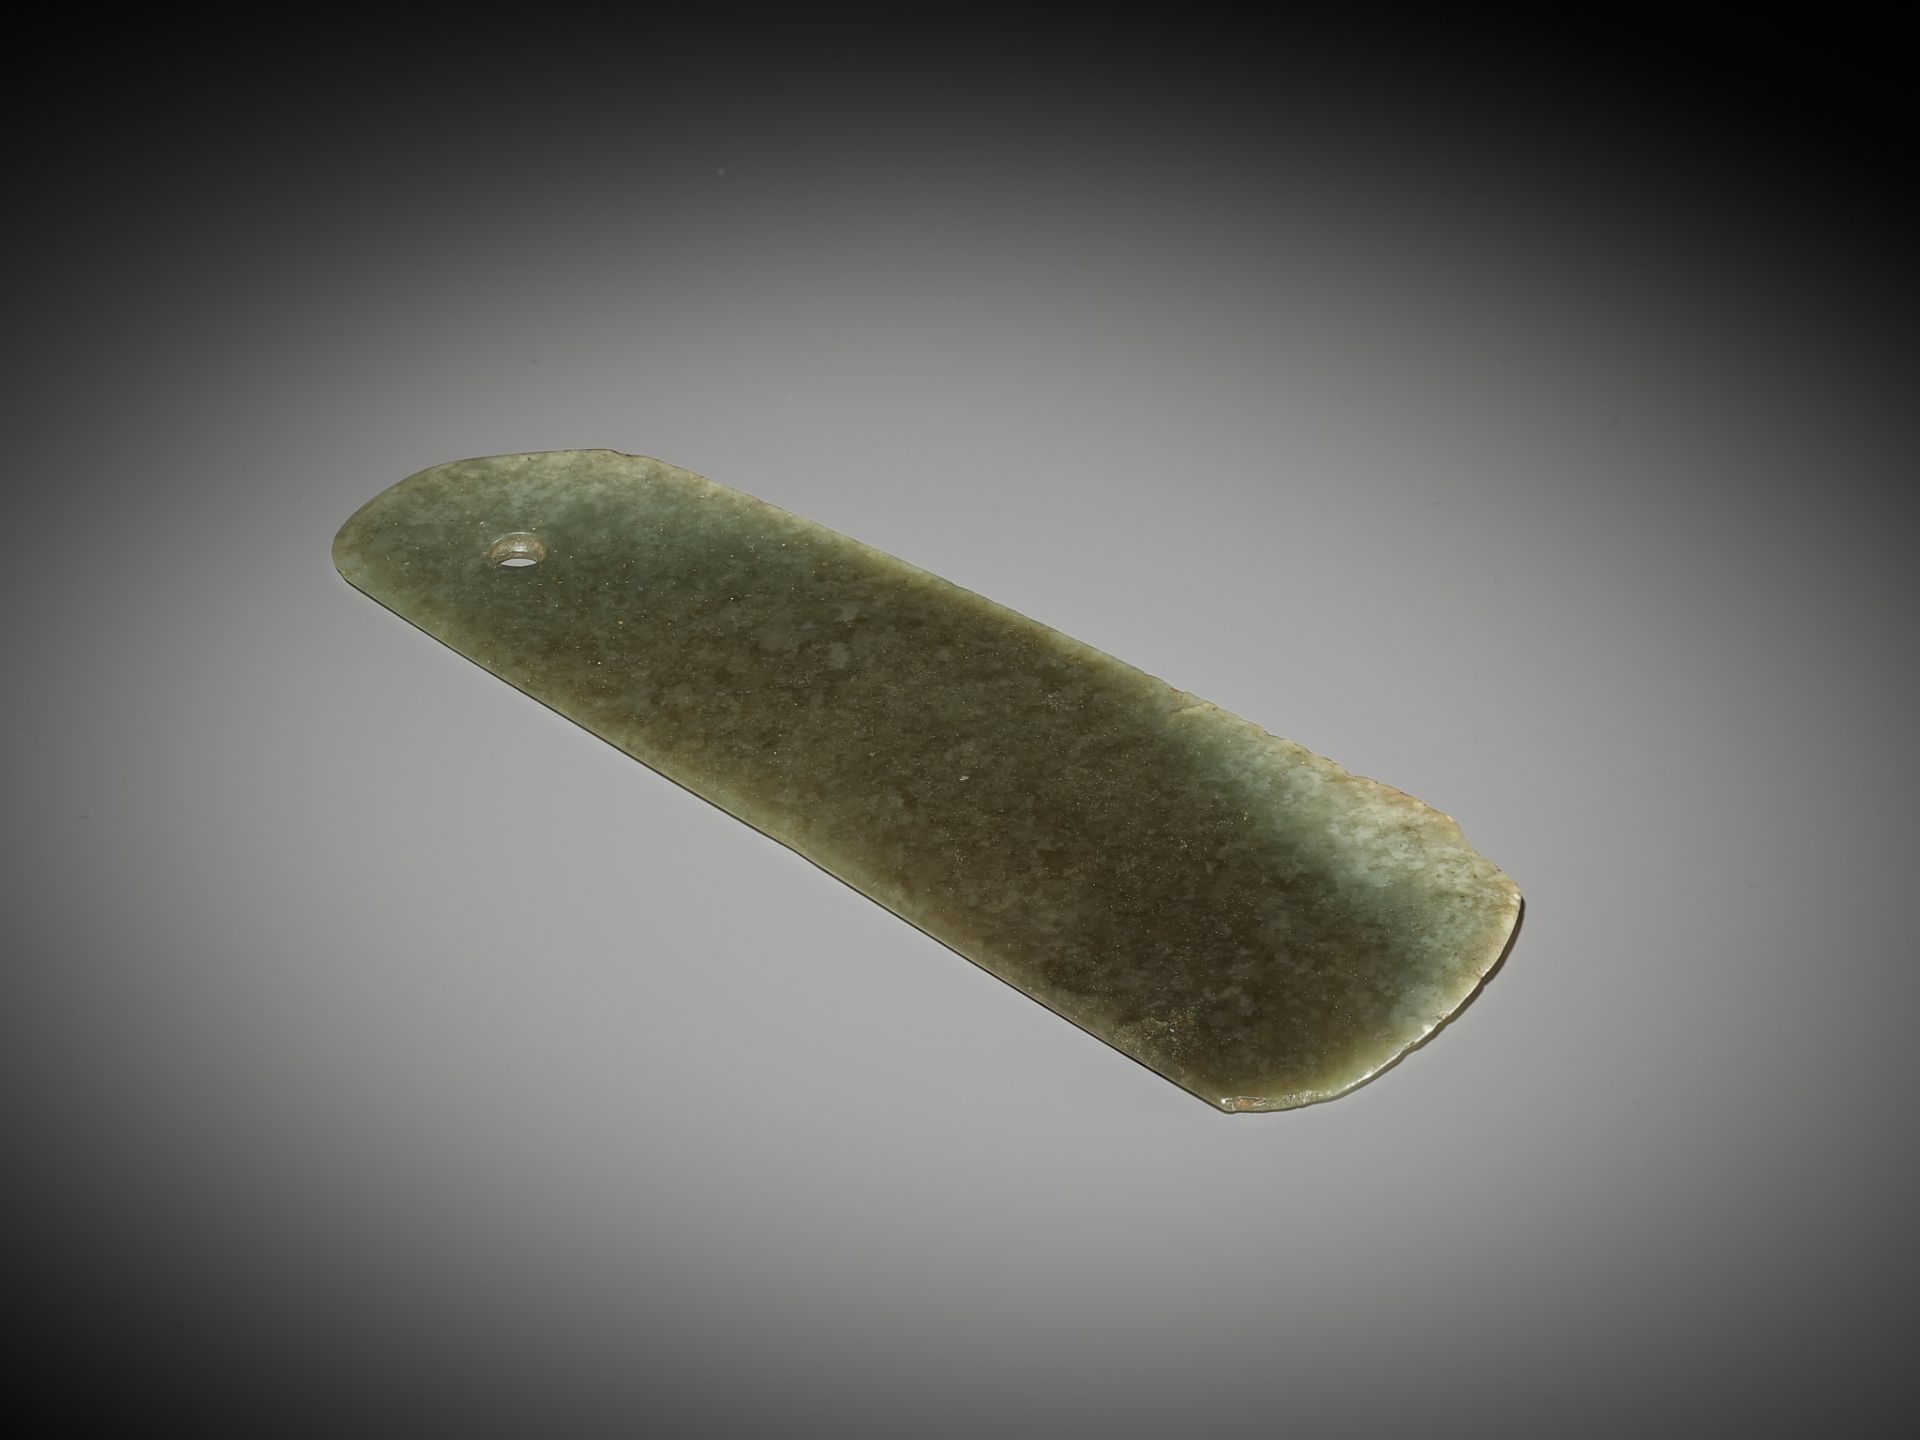 AN ARCHAIC CEREMONIAL JADE BLADE, YUE, NEOLITHIC PERIOD TO SHANG DYNASTY - Image 13 of 16